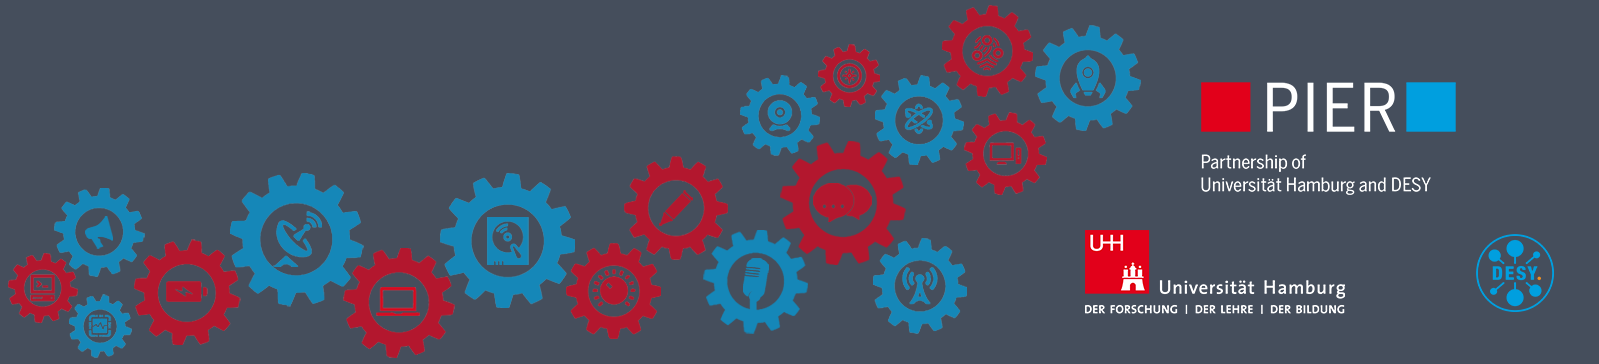 Banner Image showing gear wheels with Icons, the PIER Logo, the Universität Hamburg Logo and the DESY Logo